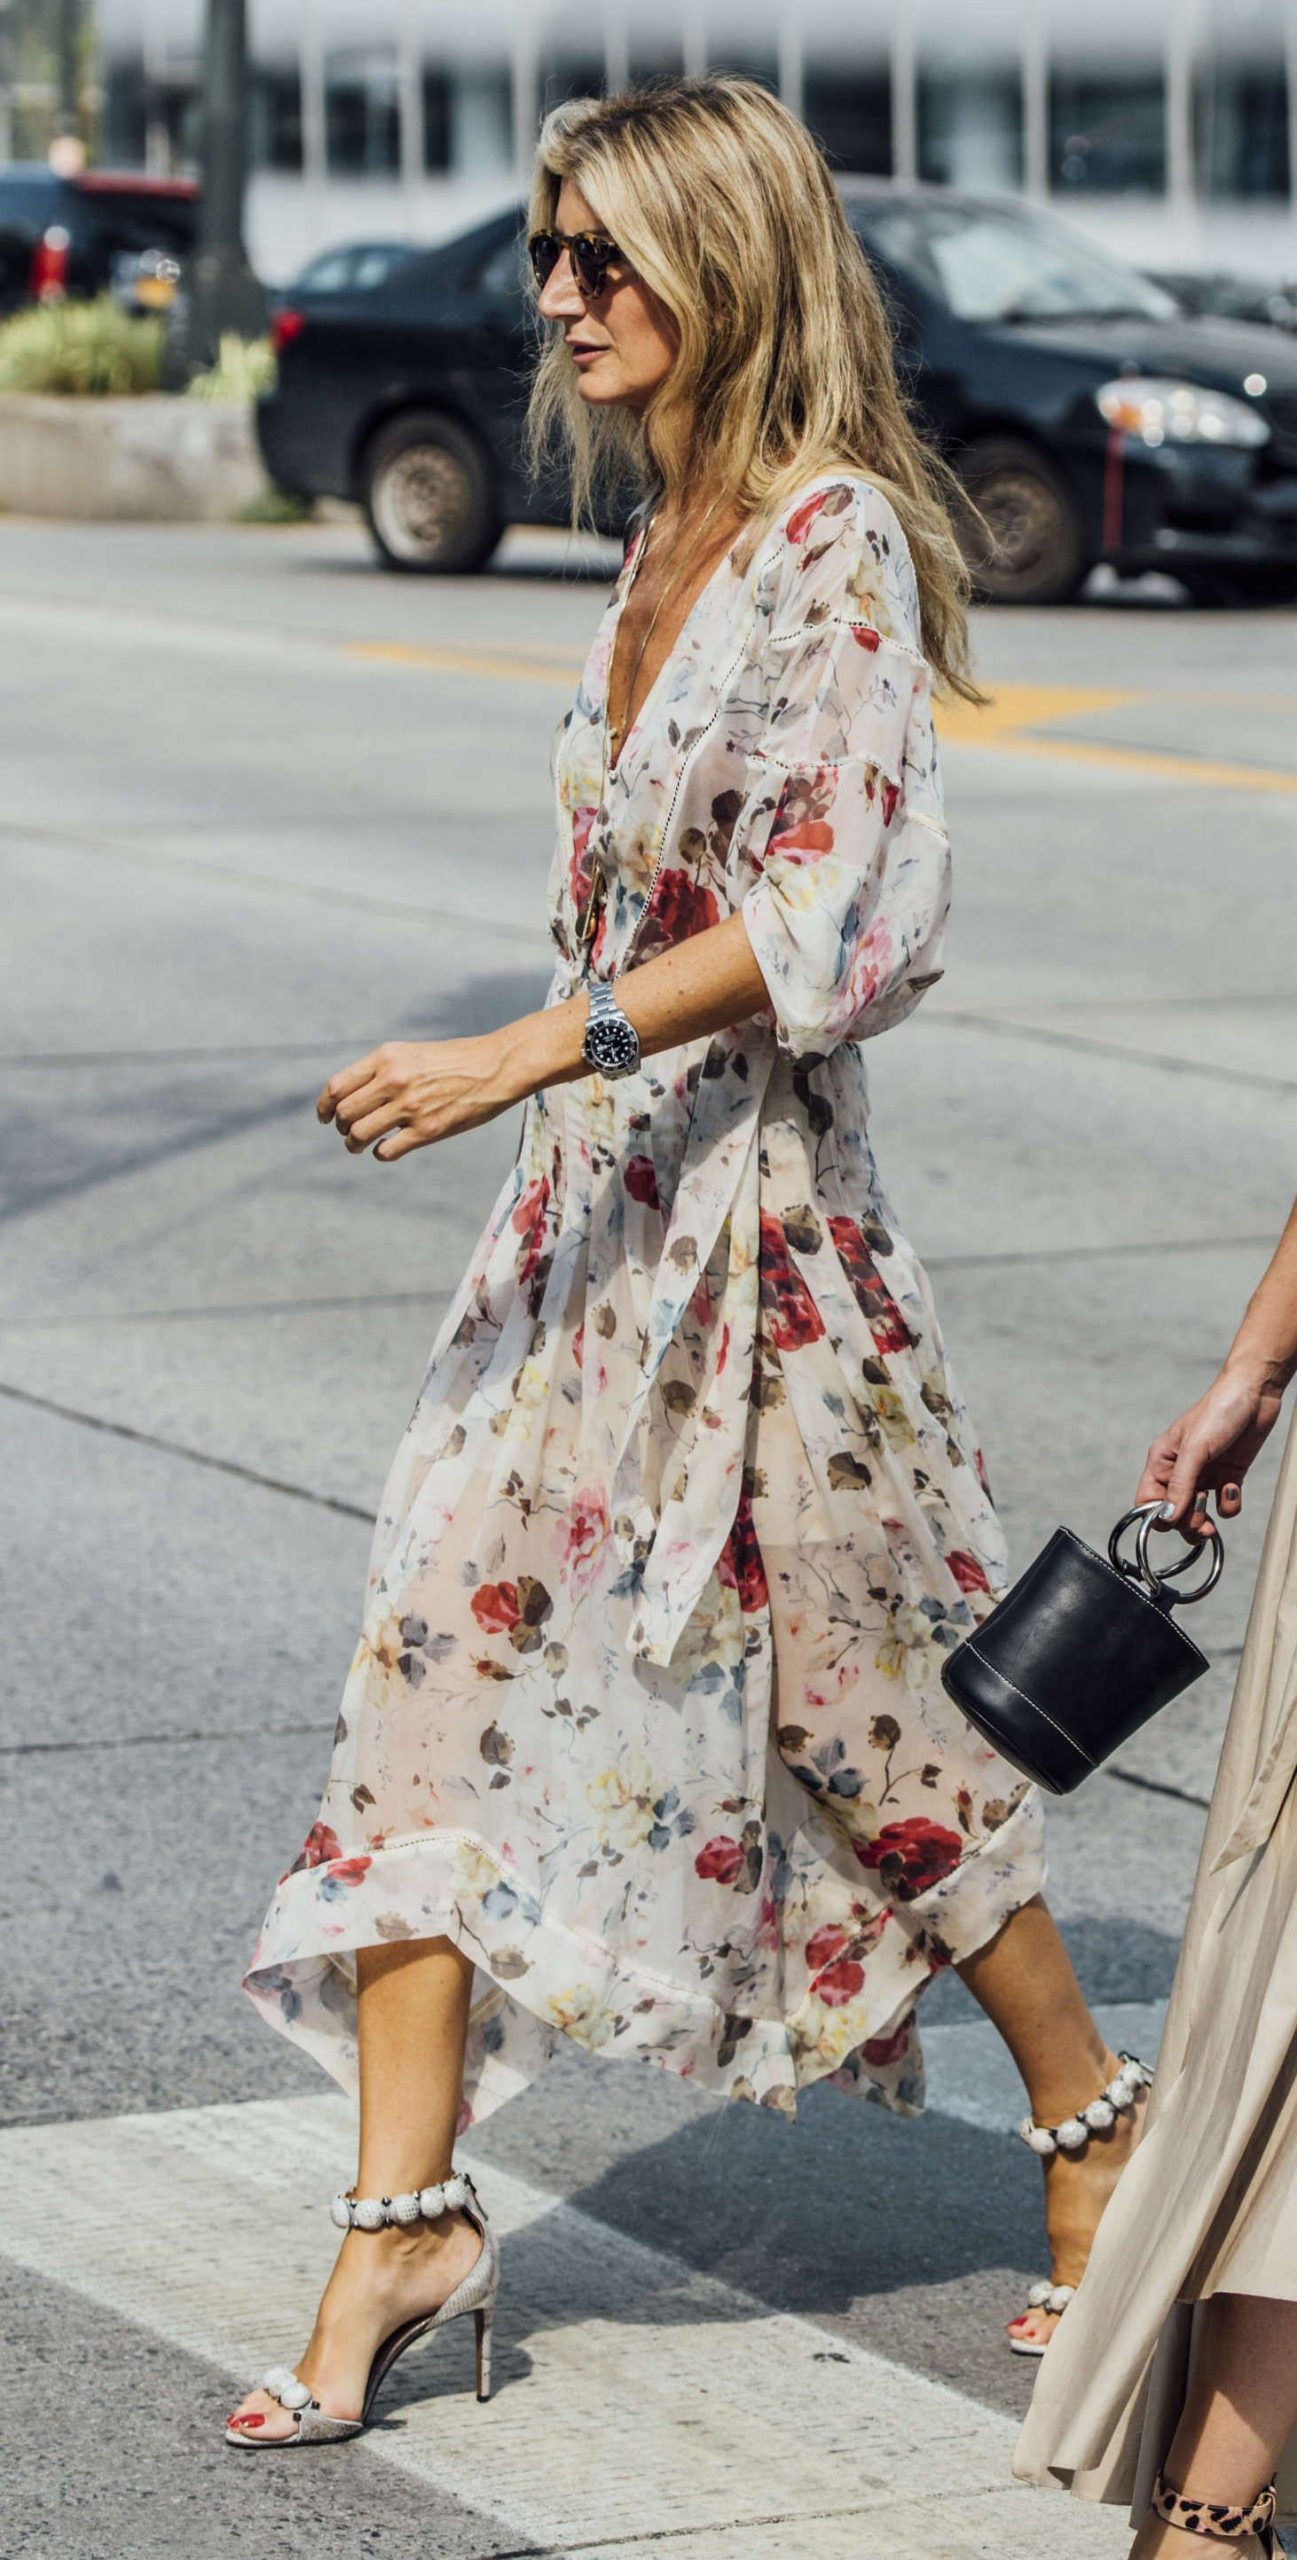 white and floral dress | midi | springtime 25 of the Most Stylish Dresses to Wea…